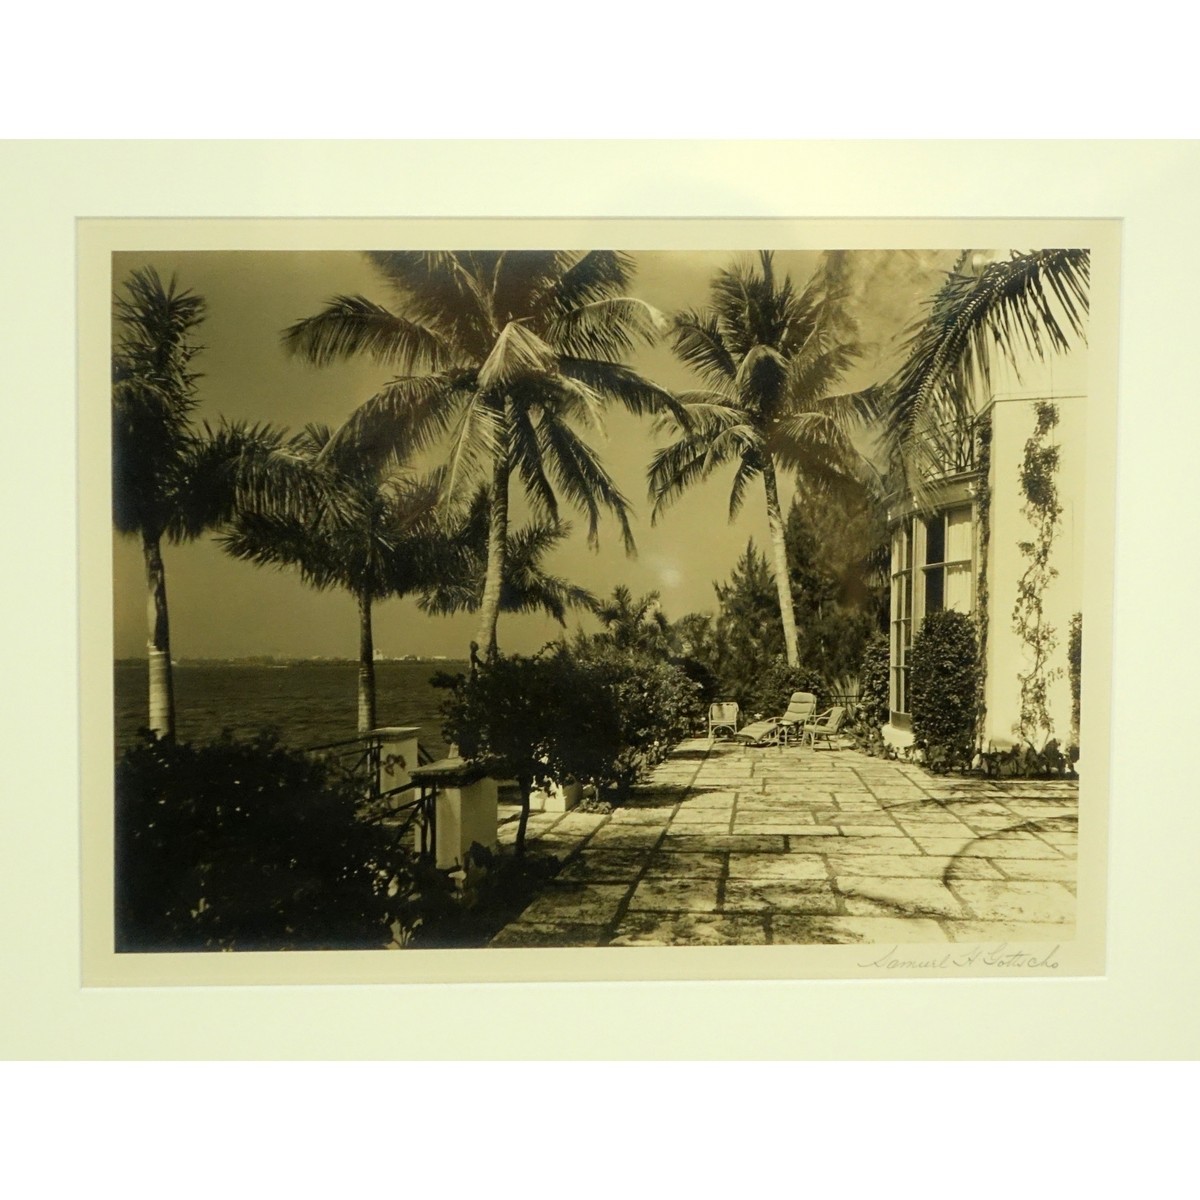 Two (2) Works by Samuel Gottscho, American (1875 - 1971) Black and White Silver Gelatin Prints of Two Courtyard Scenes, Each Signed Lower Right. Good condition.